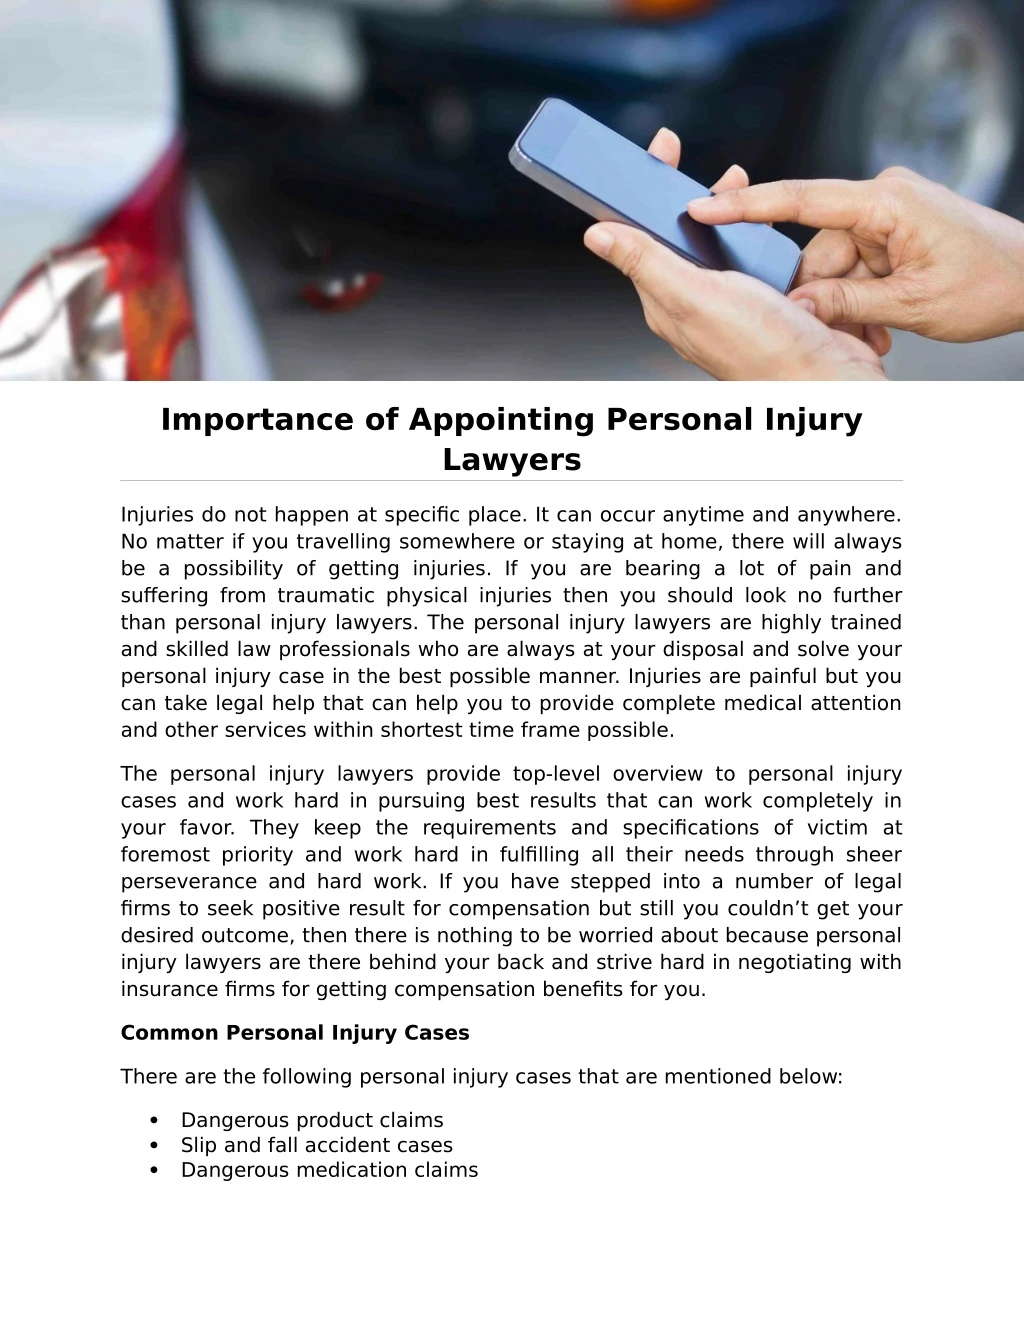 importance of appointing personal injury lawyers